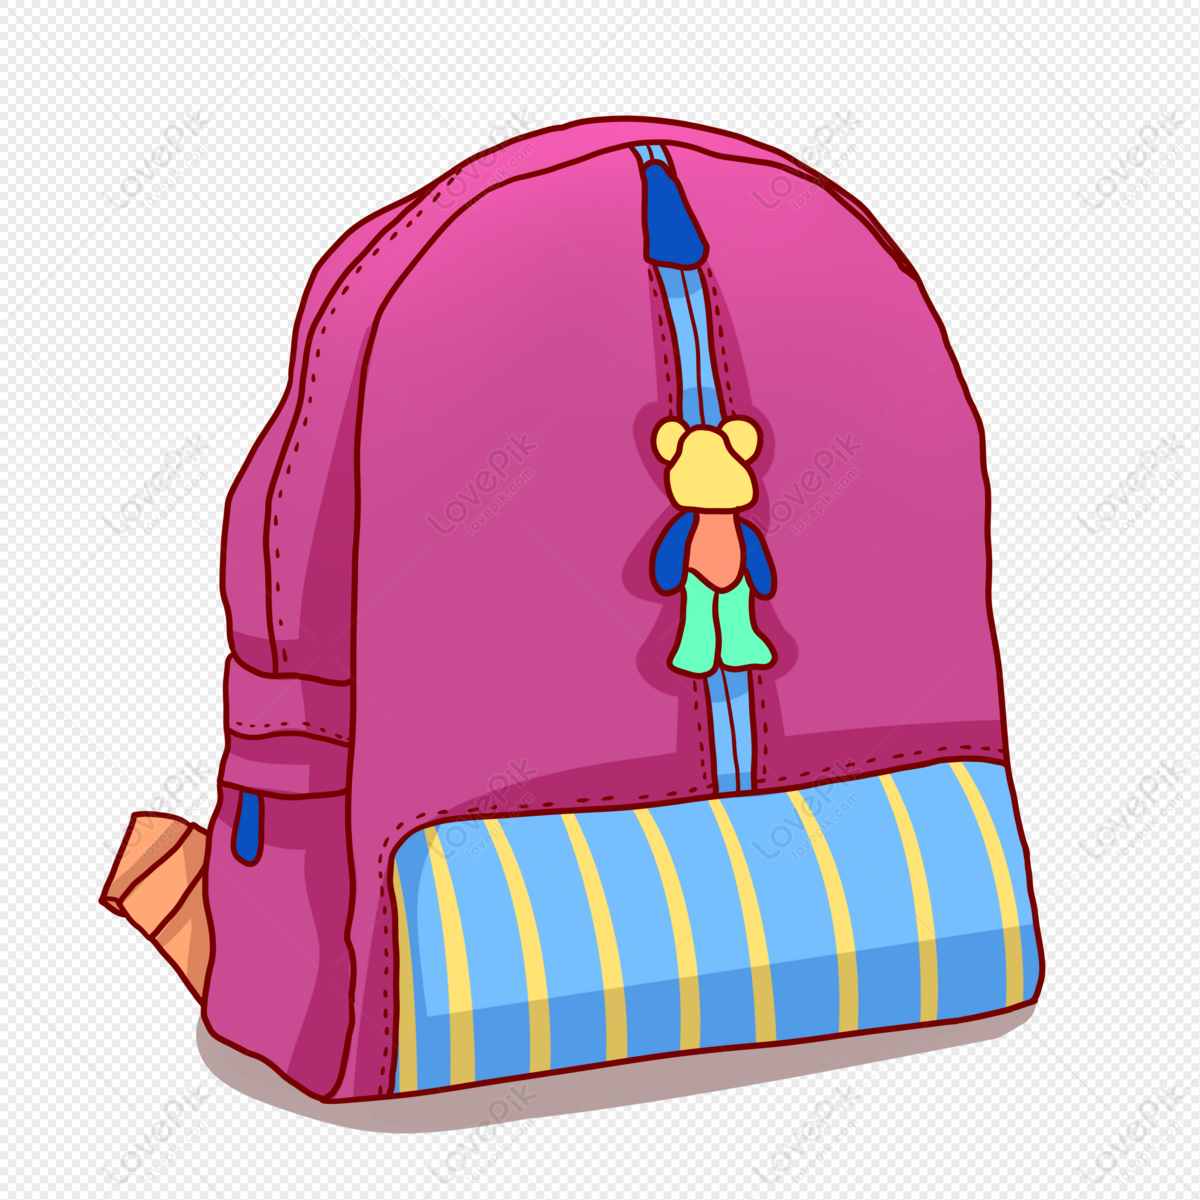 Blue Suitcase, Luggage Bag, Airport Luggage, Travel Bag Clipart PNG Clipart  - MyFreeDrawings